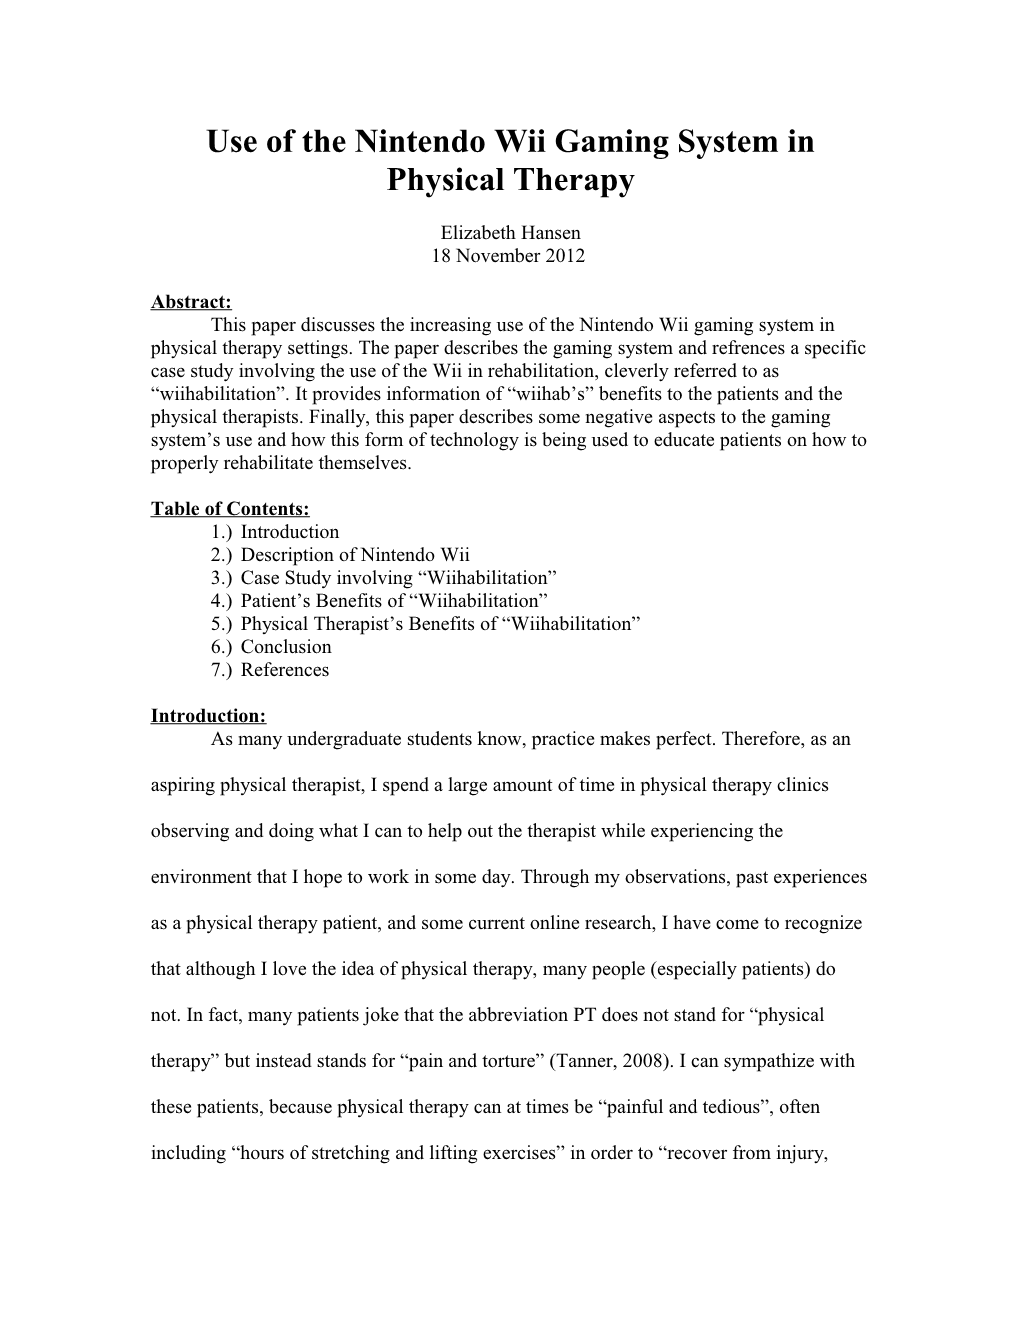 Use of the Nintendo Wii Gaming System in Physical Therapy